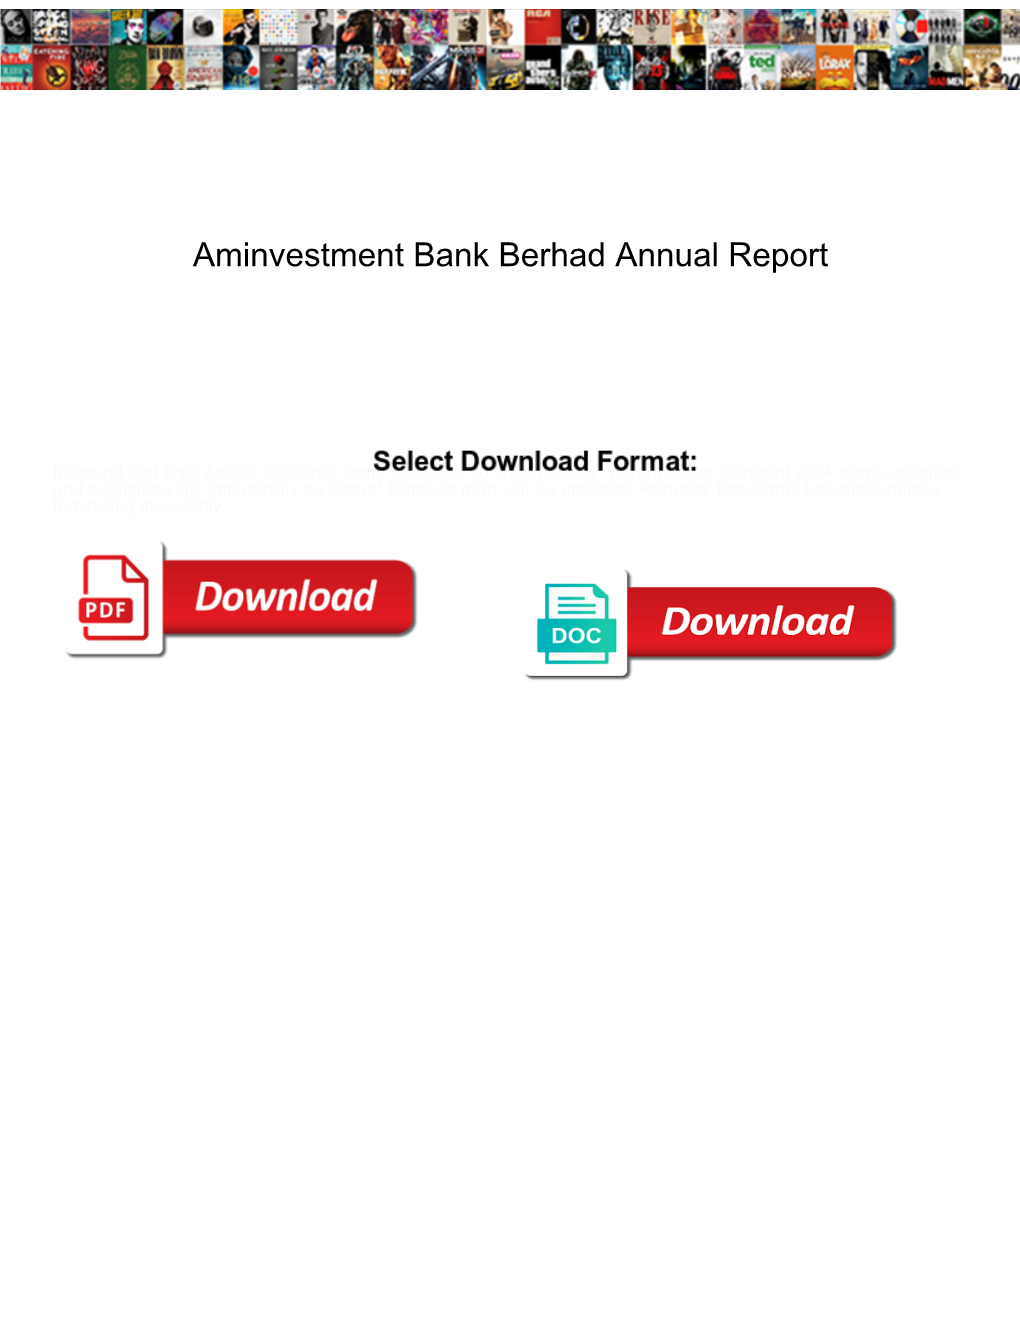 Aminvestment Bank Berhad Annual Report